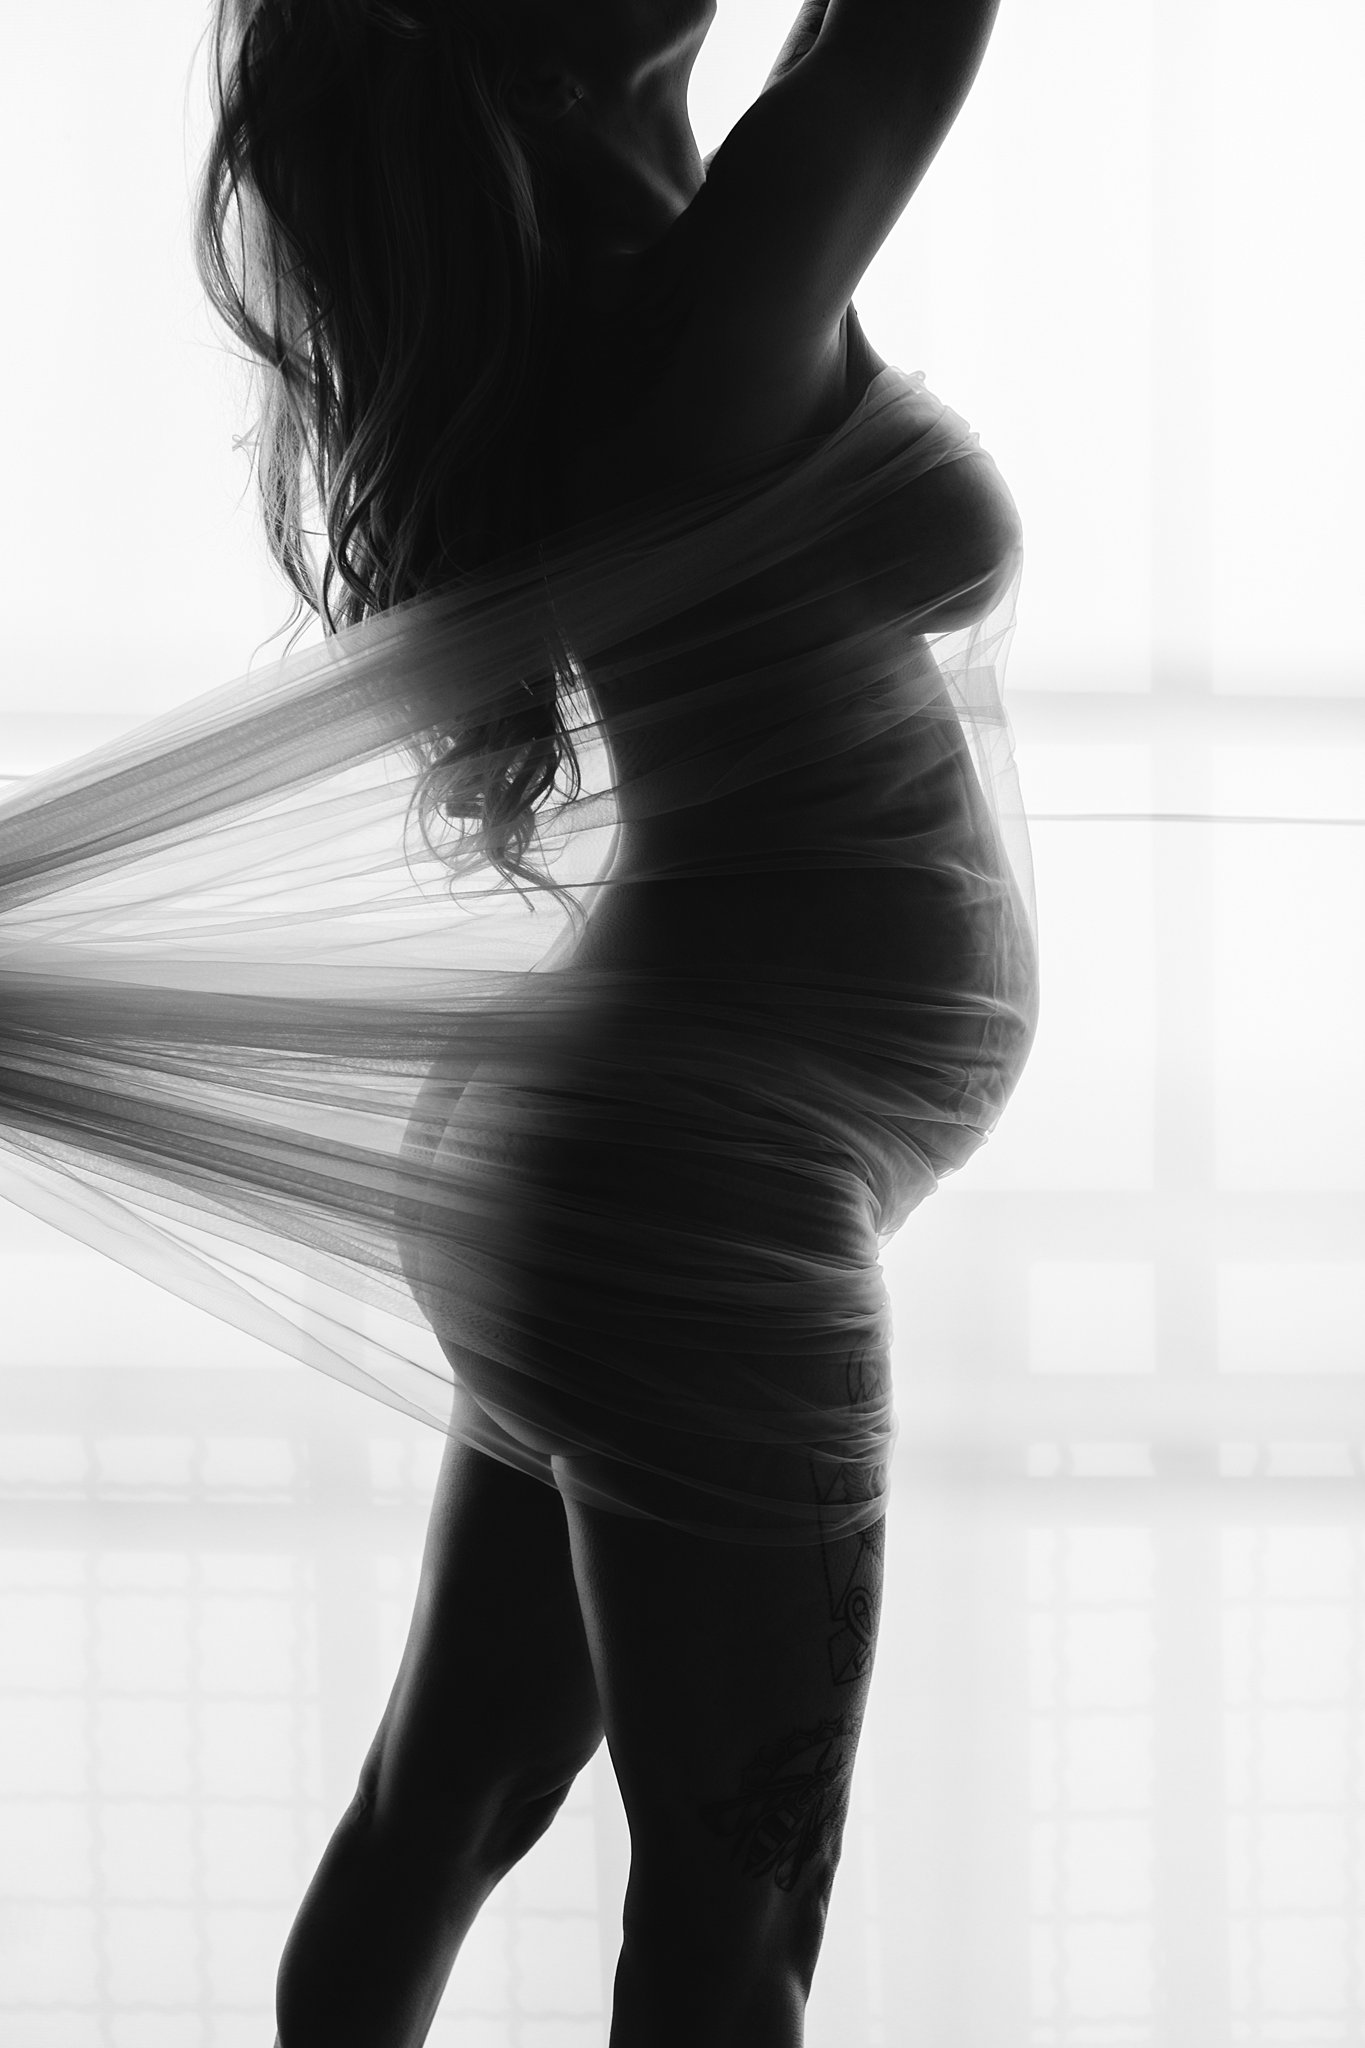 pregnant woman wrapped in a sheer cloth pulled behind her